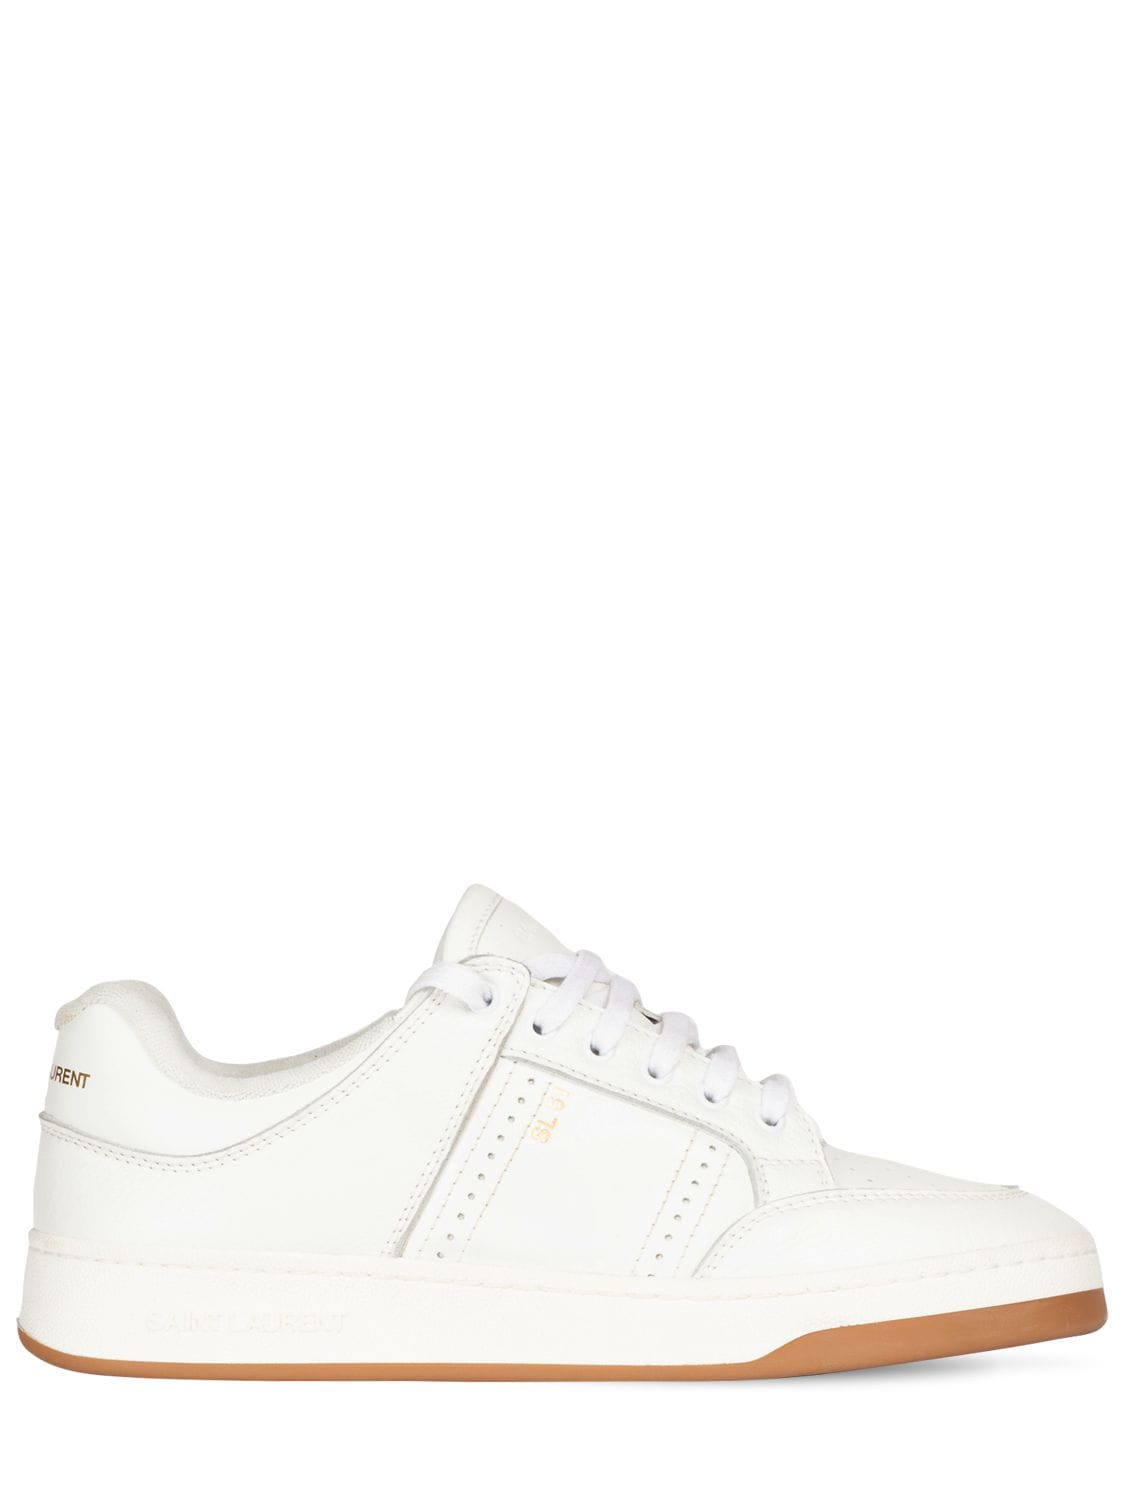 Image of Sl/61 Low-top Leather Sneakers